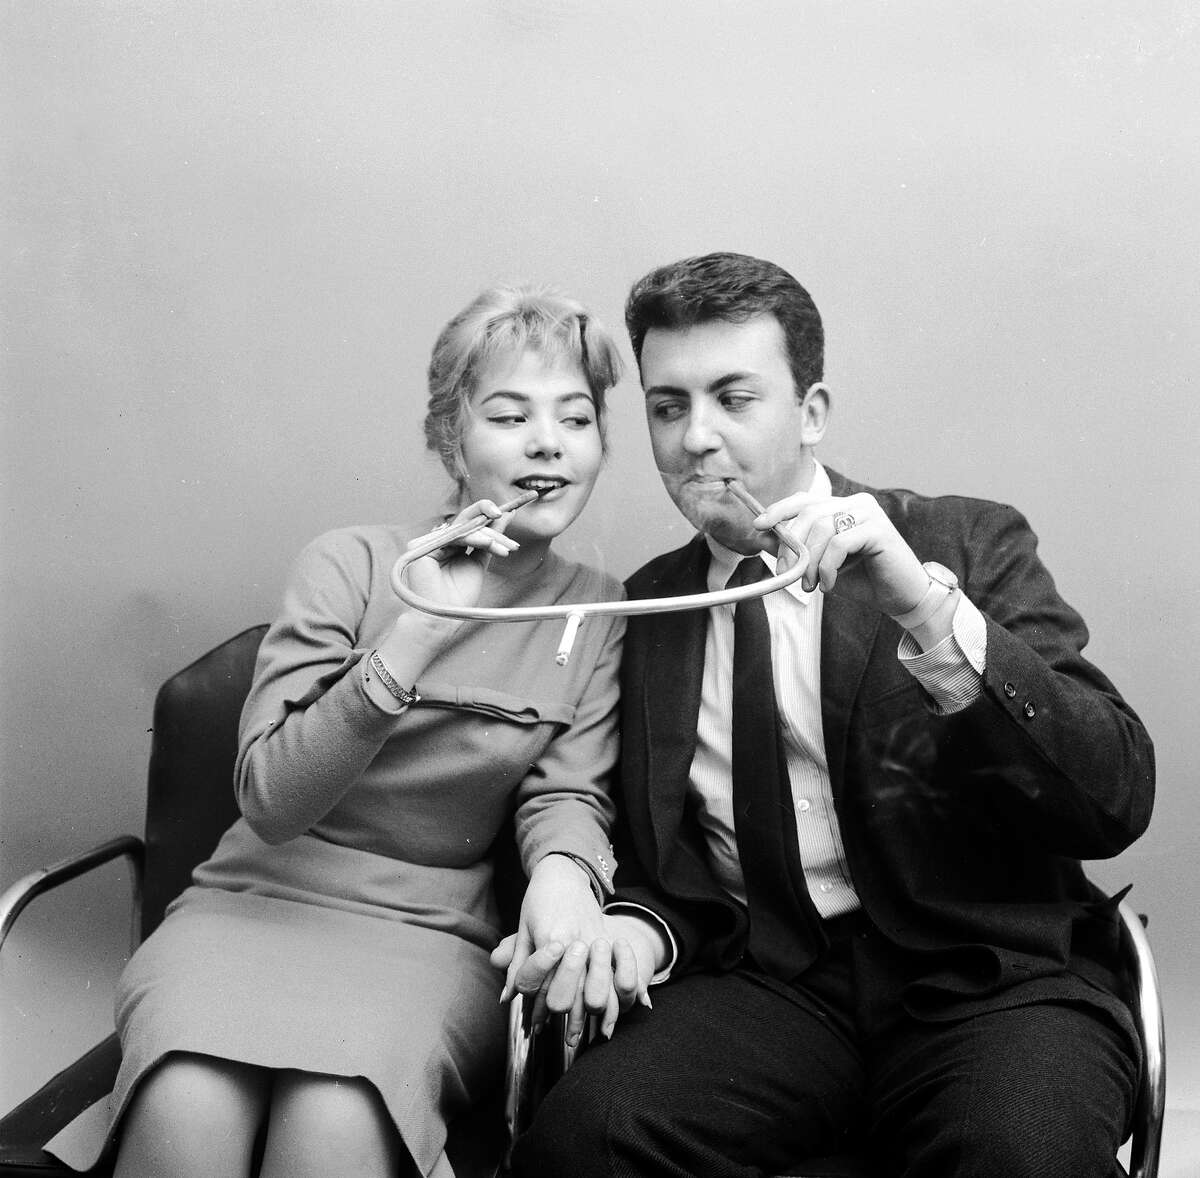 Cigarette holder made for two, 1955 Half the nicotine, twice the intimacy. But come on.